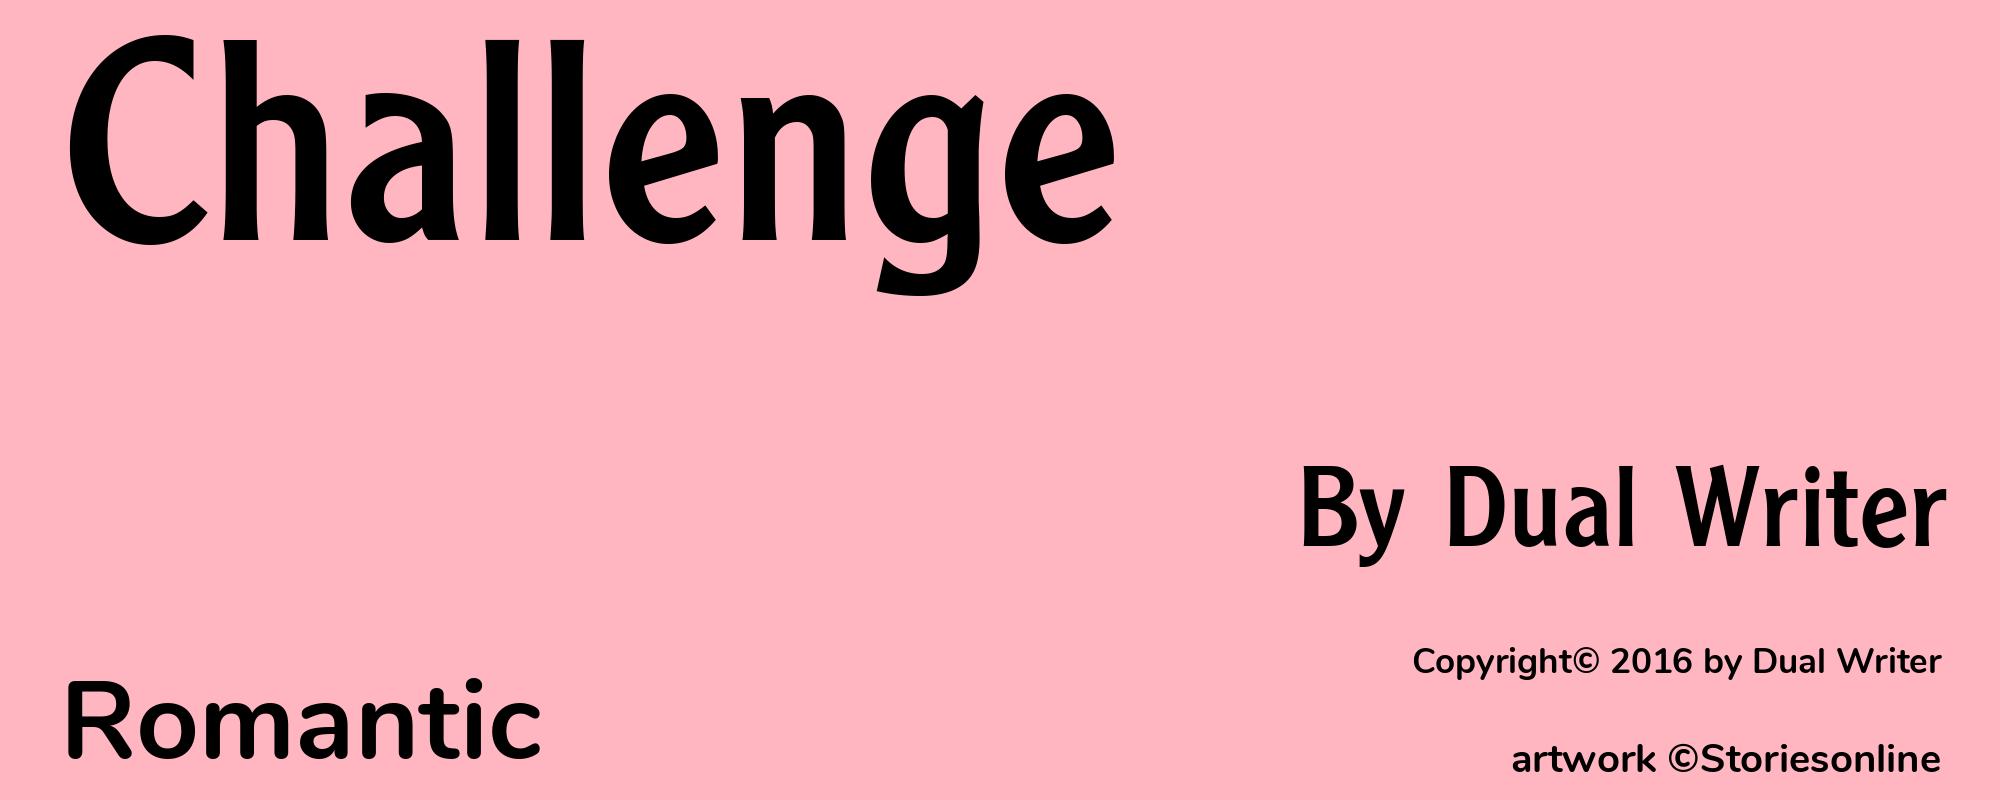 Challenge - Cover